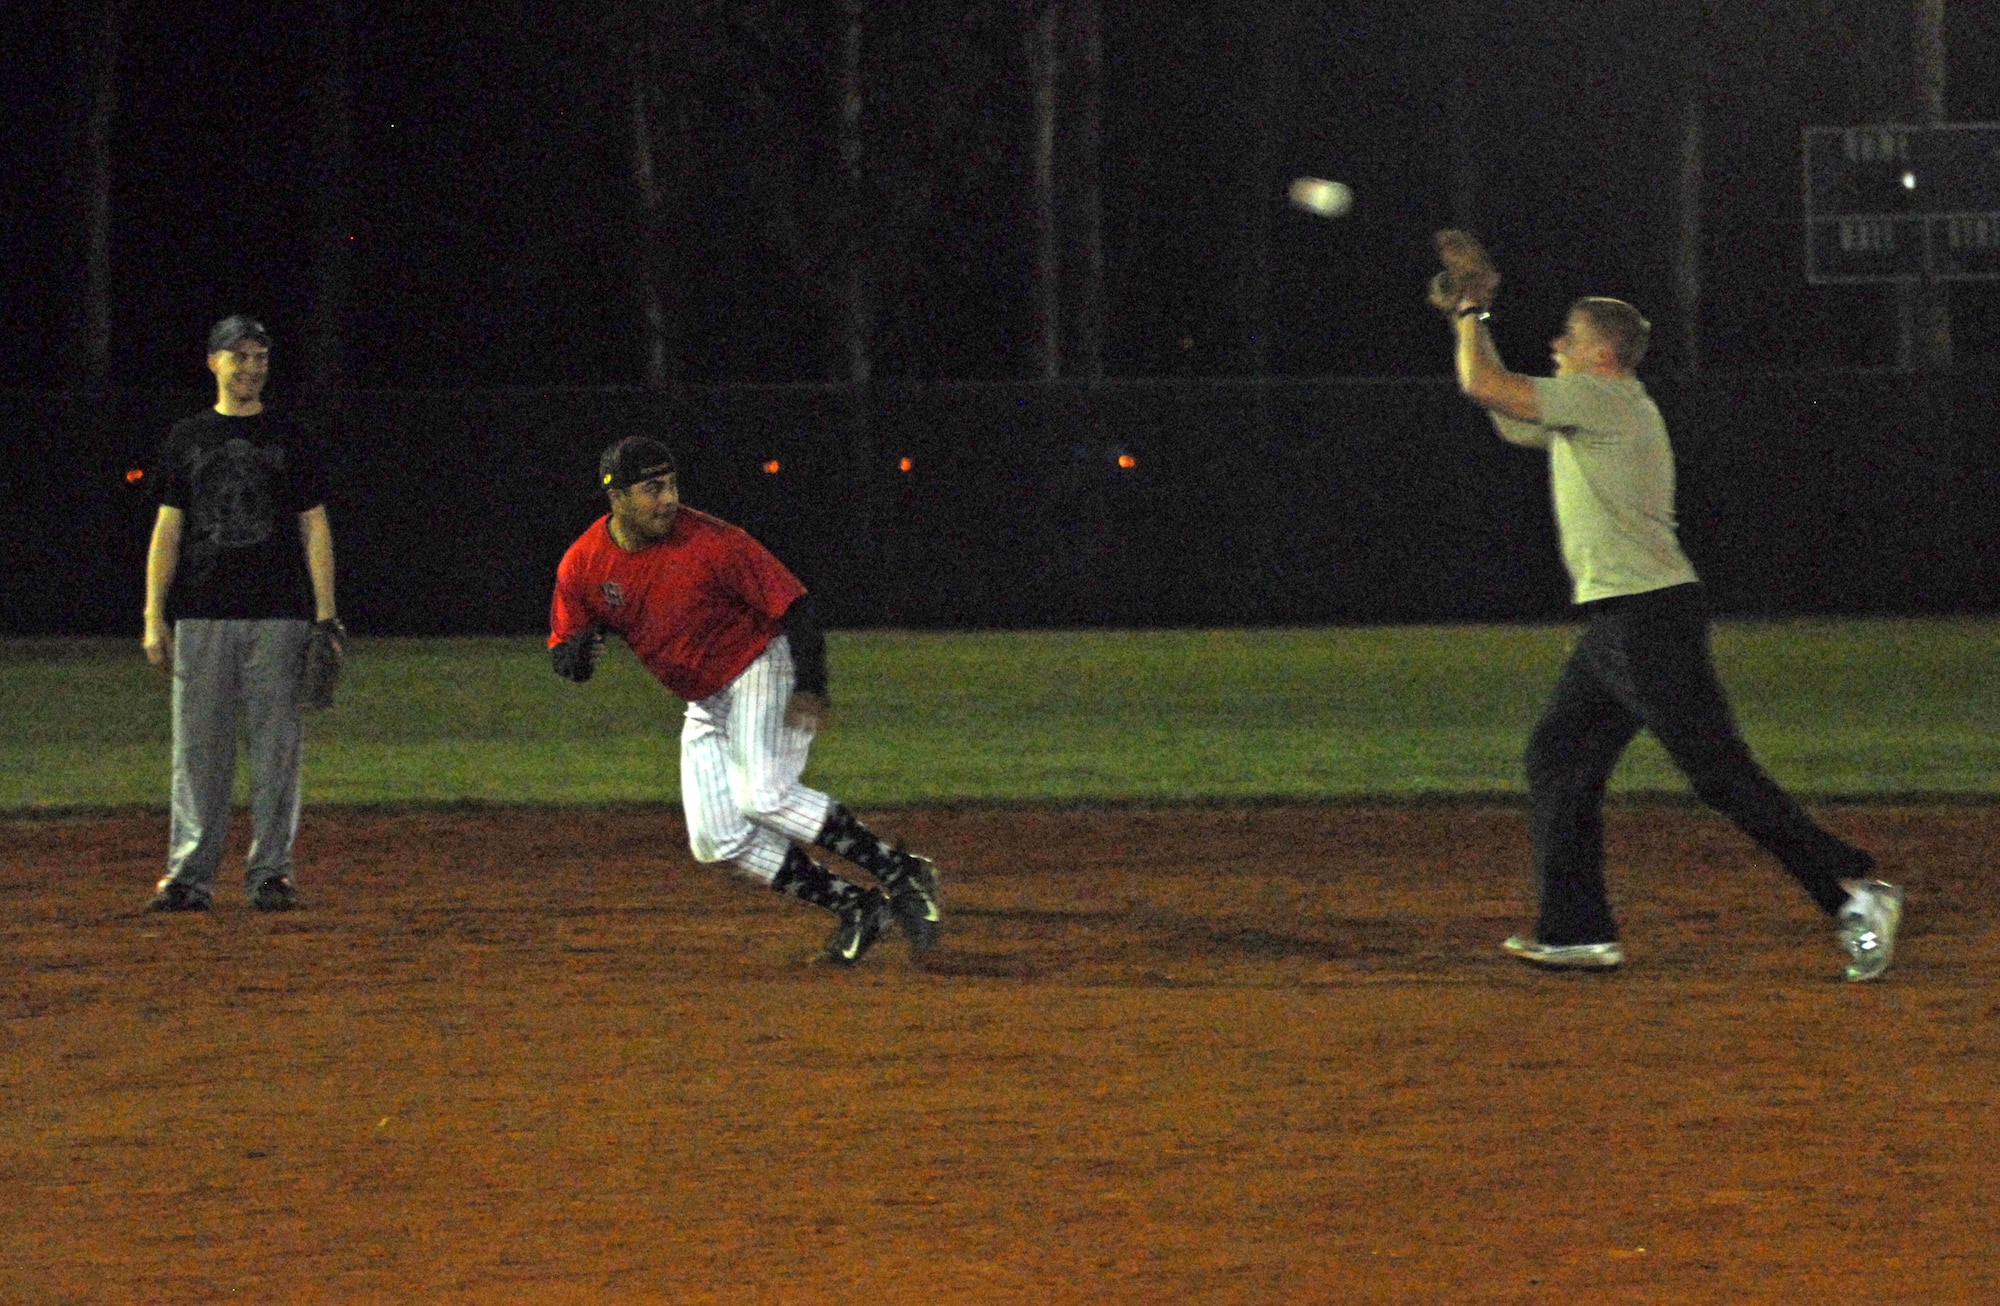 VANDENBERG AIR FORCE BASE, Calif. -- Attempting to steal third base, Jon Terrones, a team member of the Army Prison Guards, pulls a fast one on opposing team members of the 30th Space Communications Squadron during a winter intramural softball practice game at the base softball field here Tuesday, Feb. 16, 2010. Winter intramural softball season runs January through March. (U.S. Air Force photo/Airman 1st Class Kerelin Molina)